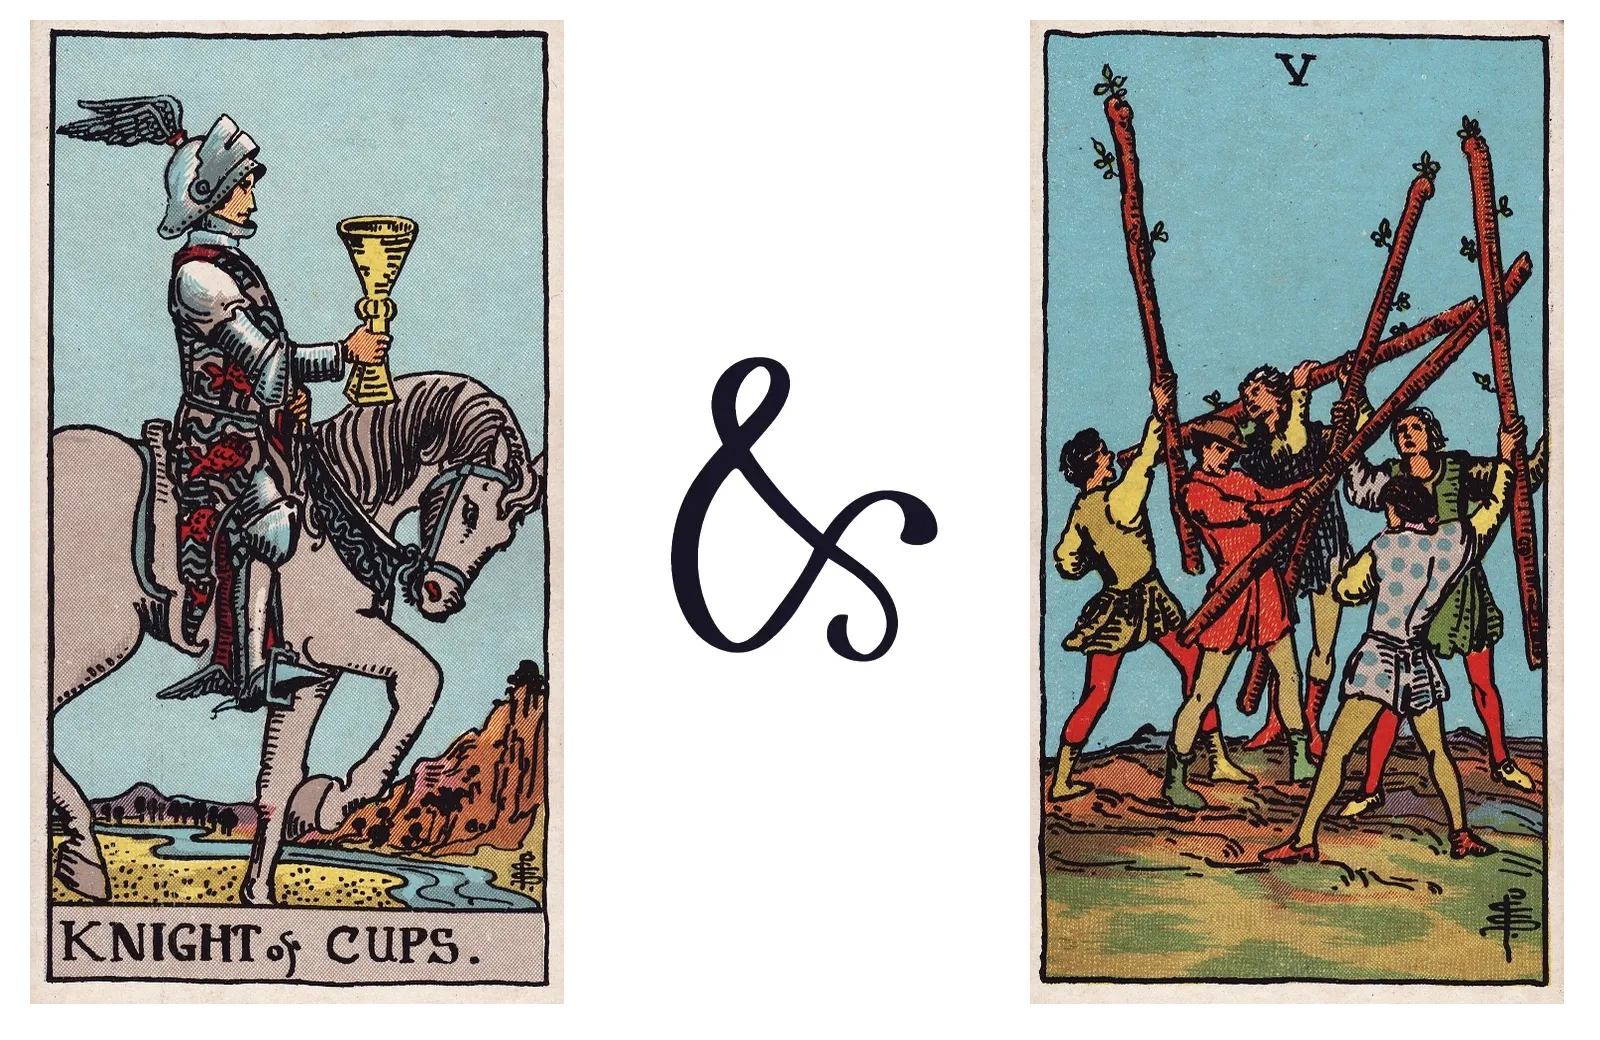 Knight of Cups and Five of Wands